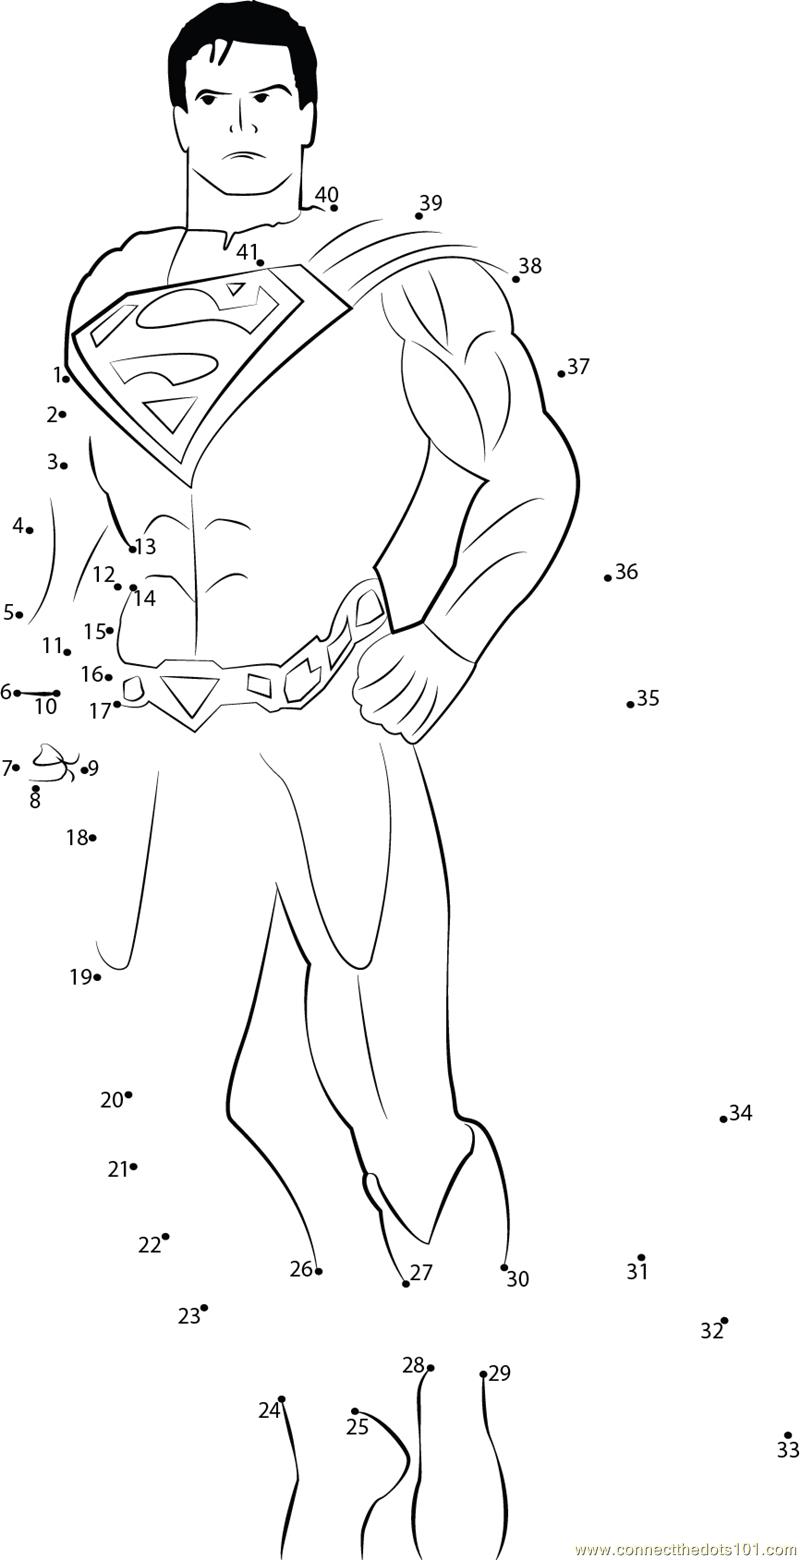 superhero connect the dots superman the hero dot to dot printable worksheet connect superhero the connect dots 